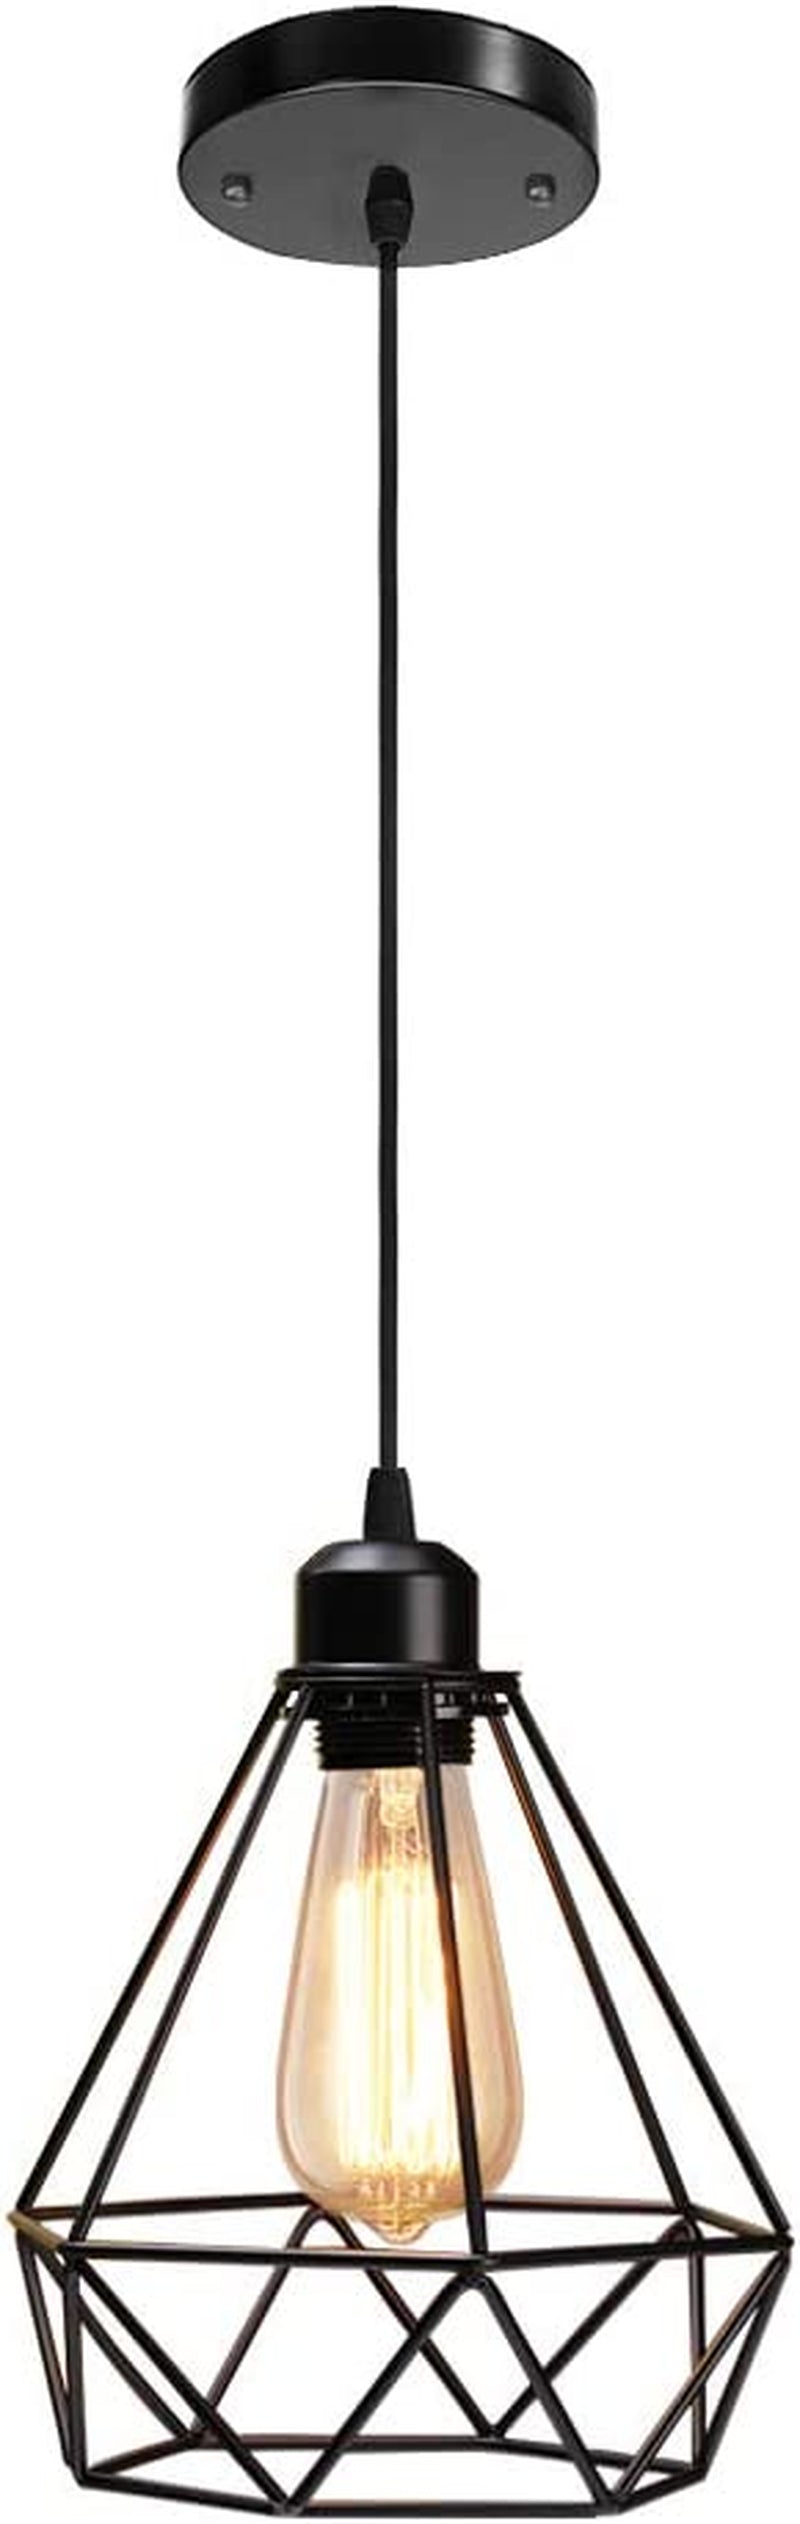 HESSION Retro Pendant Light, Industrial Metal Cage Mini Pendant Light Oil Rubbed Finish, Rustic Chandeliers Ceiling Light Fixture for Farmhouse Kitchen Island Dining Room Covered Patio Home & Garden > Lighting > Lighting Fixtures HESSION Black  